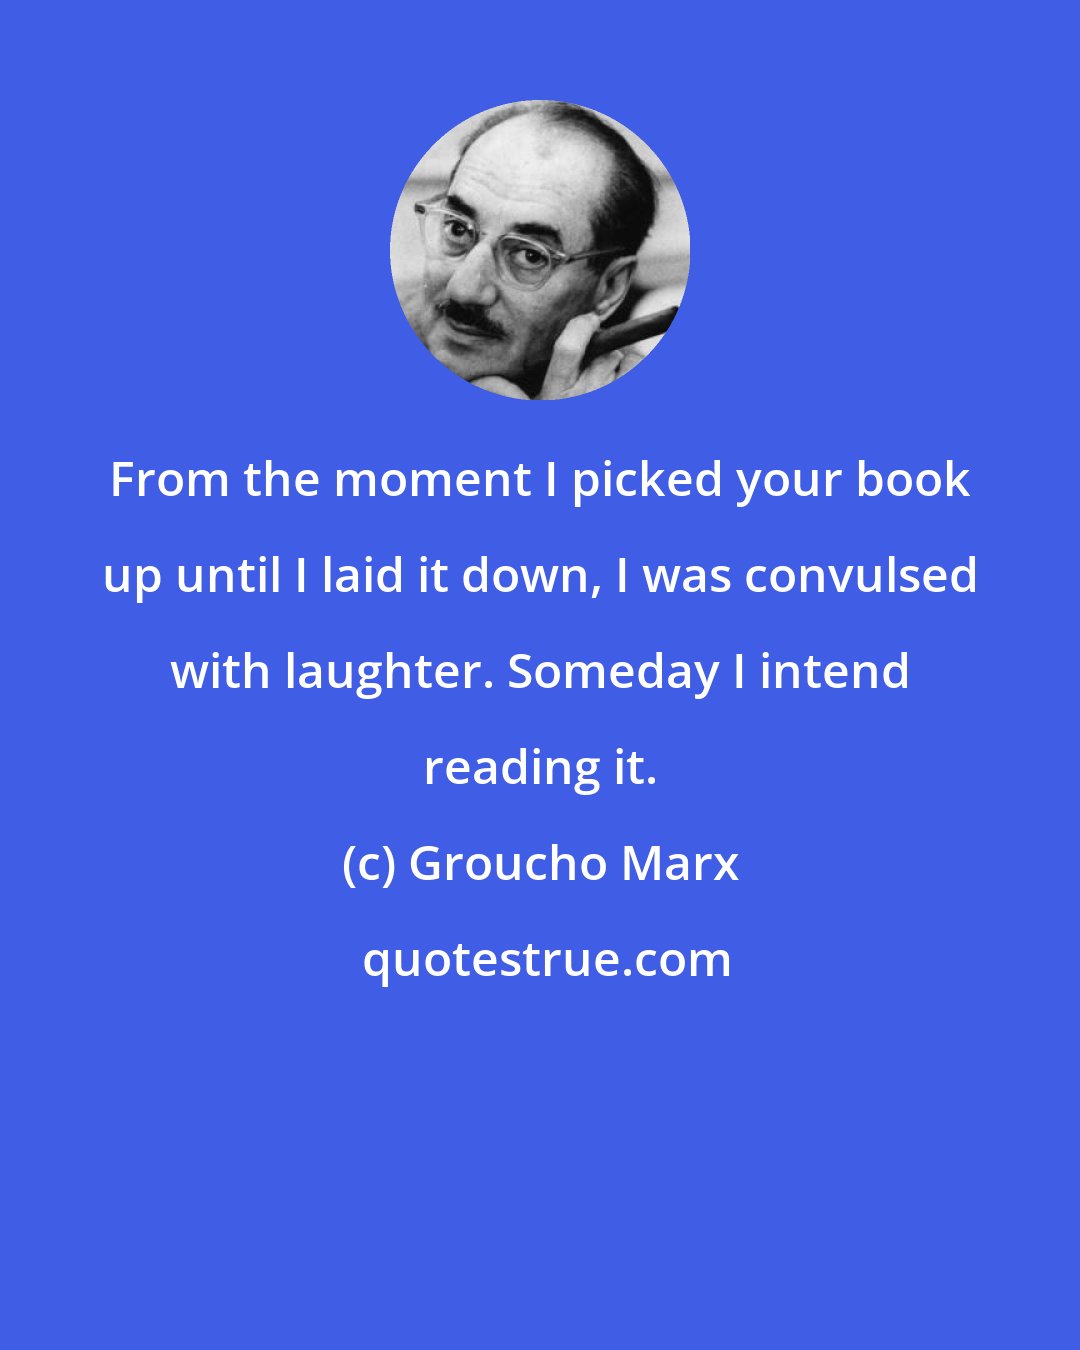 Groucho Marx: From the moment I picked your book up until I laid it down, I was convulsed with laughter. Someday I intend reading it.